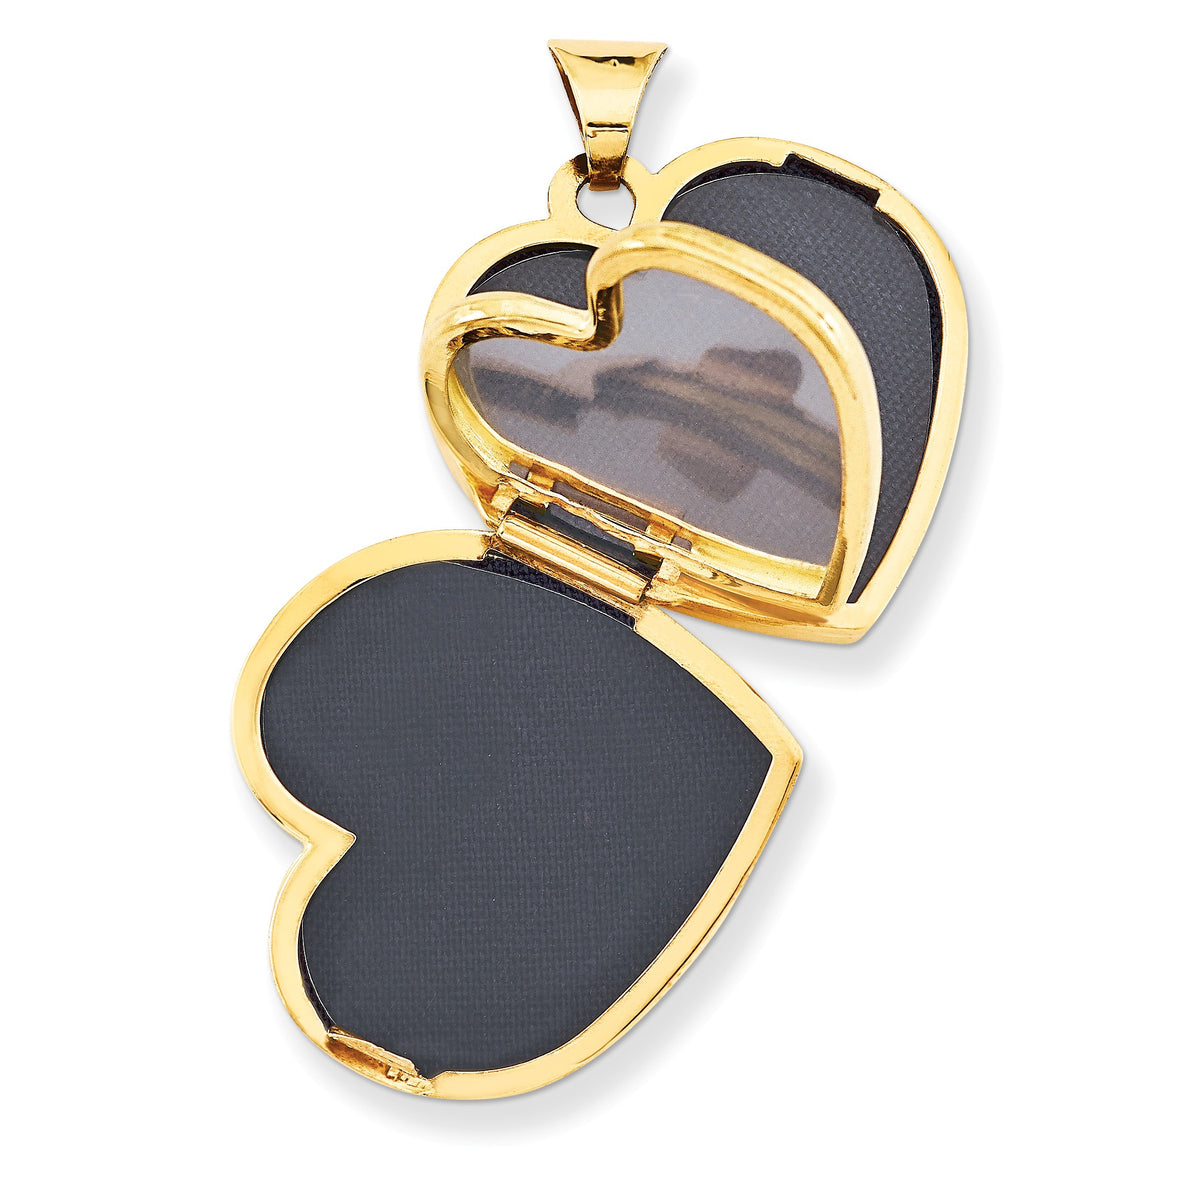 Alternate view of the 21mm Family Diamond Floral Heart Locket in 14k Yellow Gold by The Black Bow Jewelry Co.